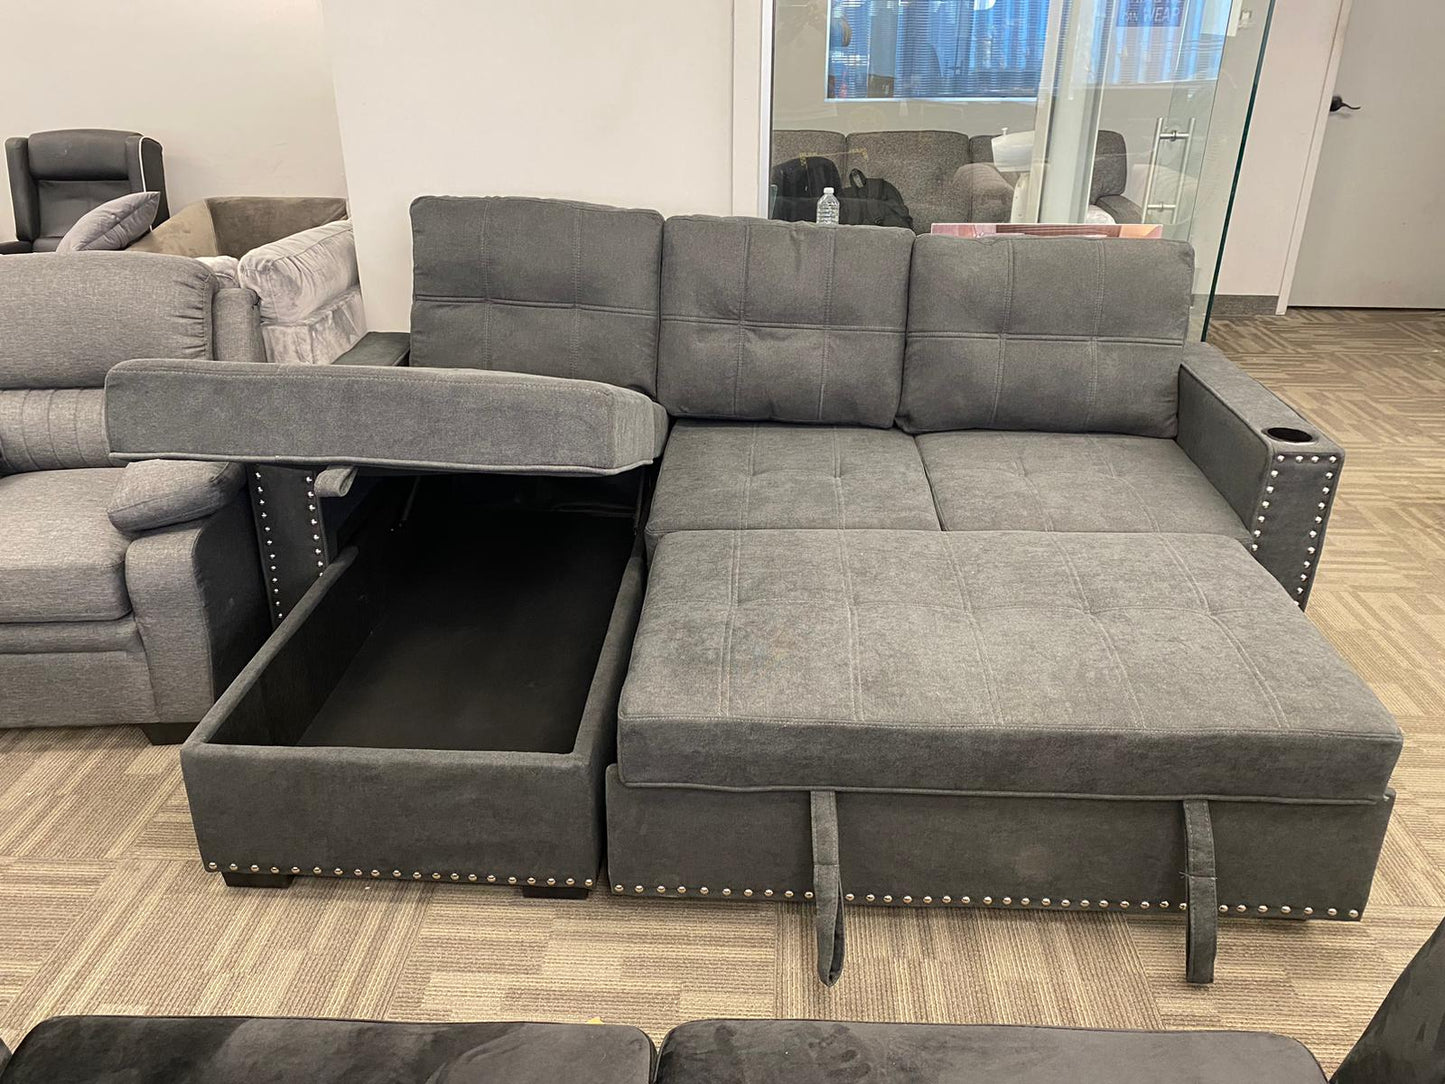 (401 NH MCDONALDS CHARCOAL GREY)- REVERSIBLE- FABRIC SECTIONAL SOFA- WITH PULL OUT BED